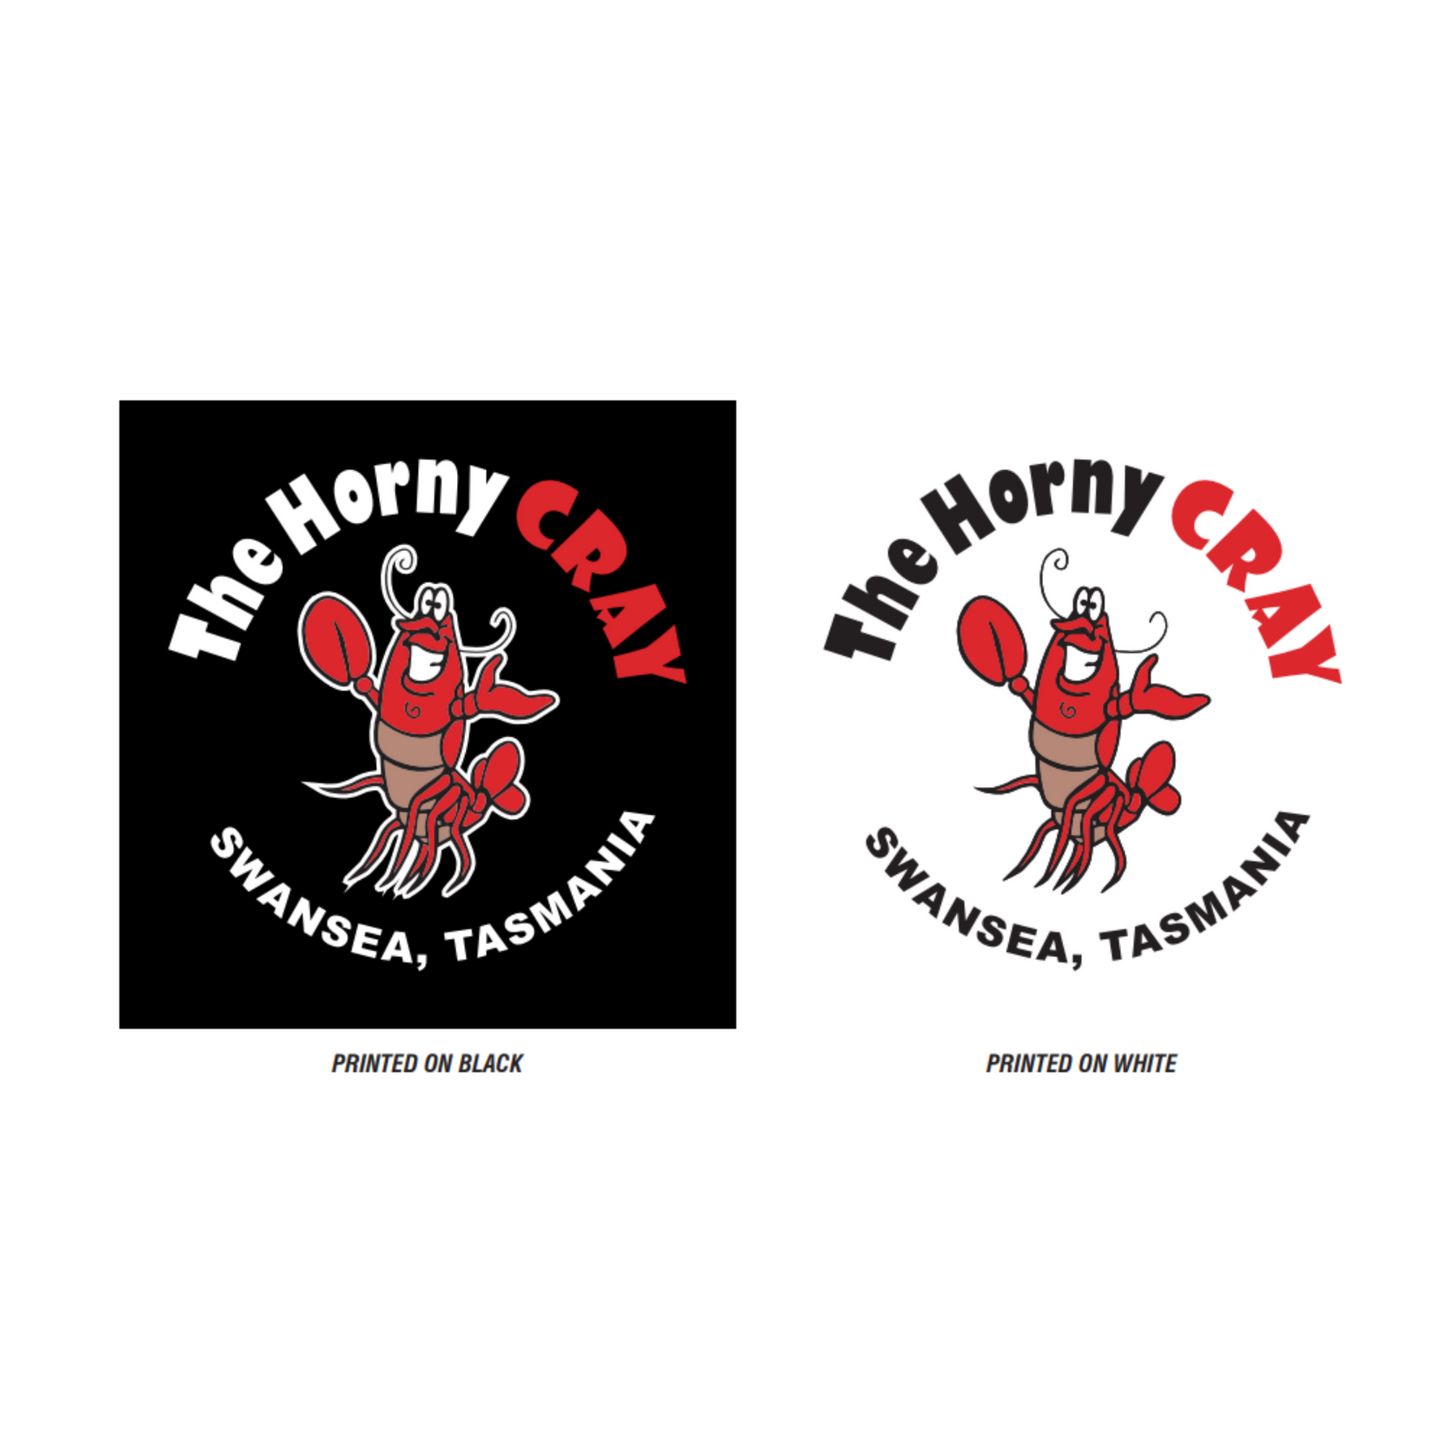 The Horny Cray stickers